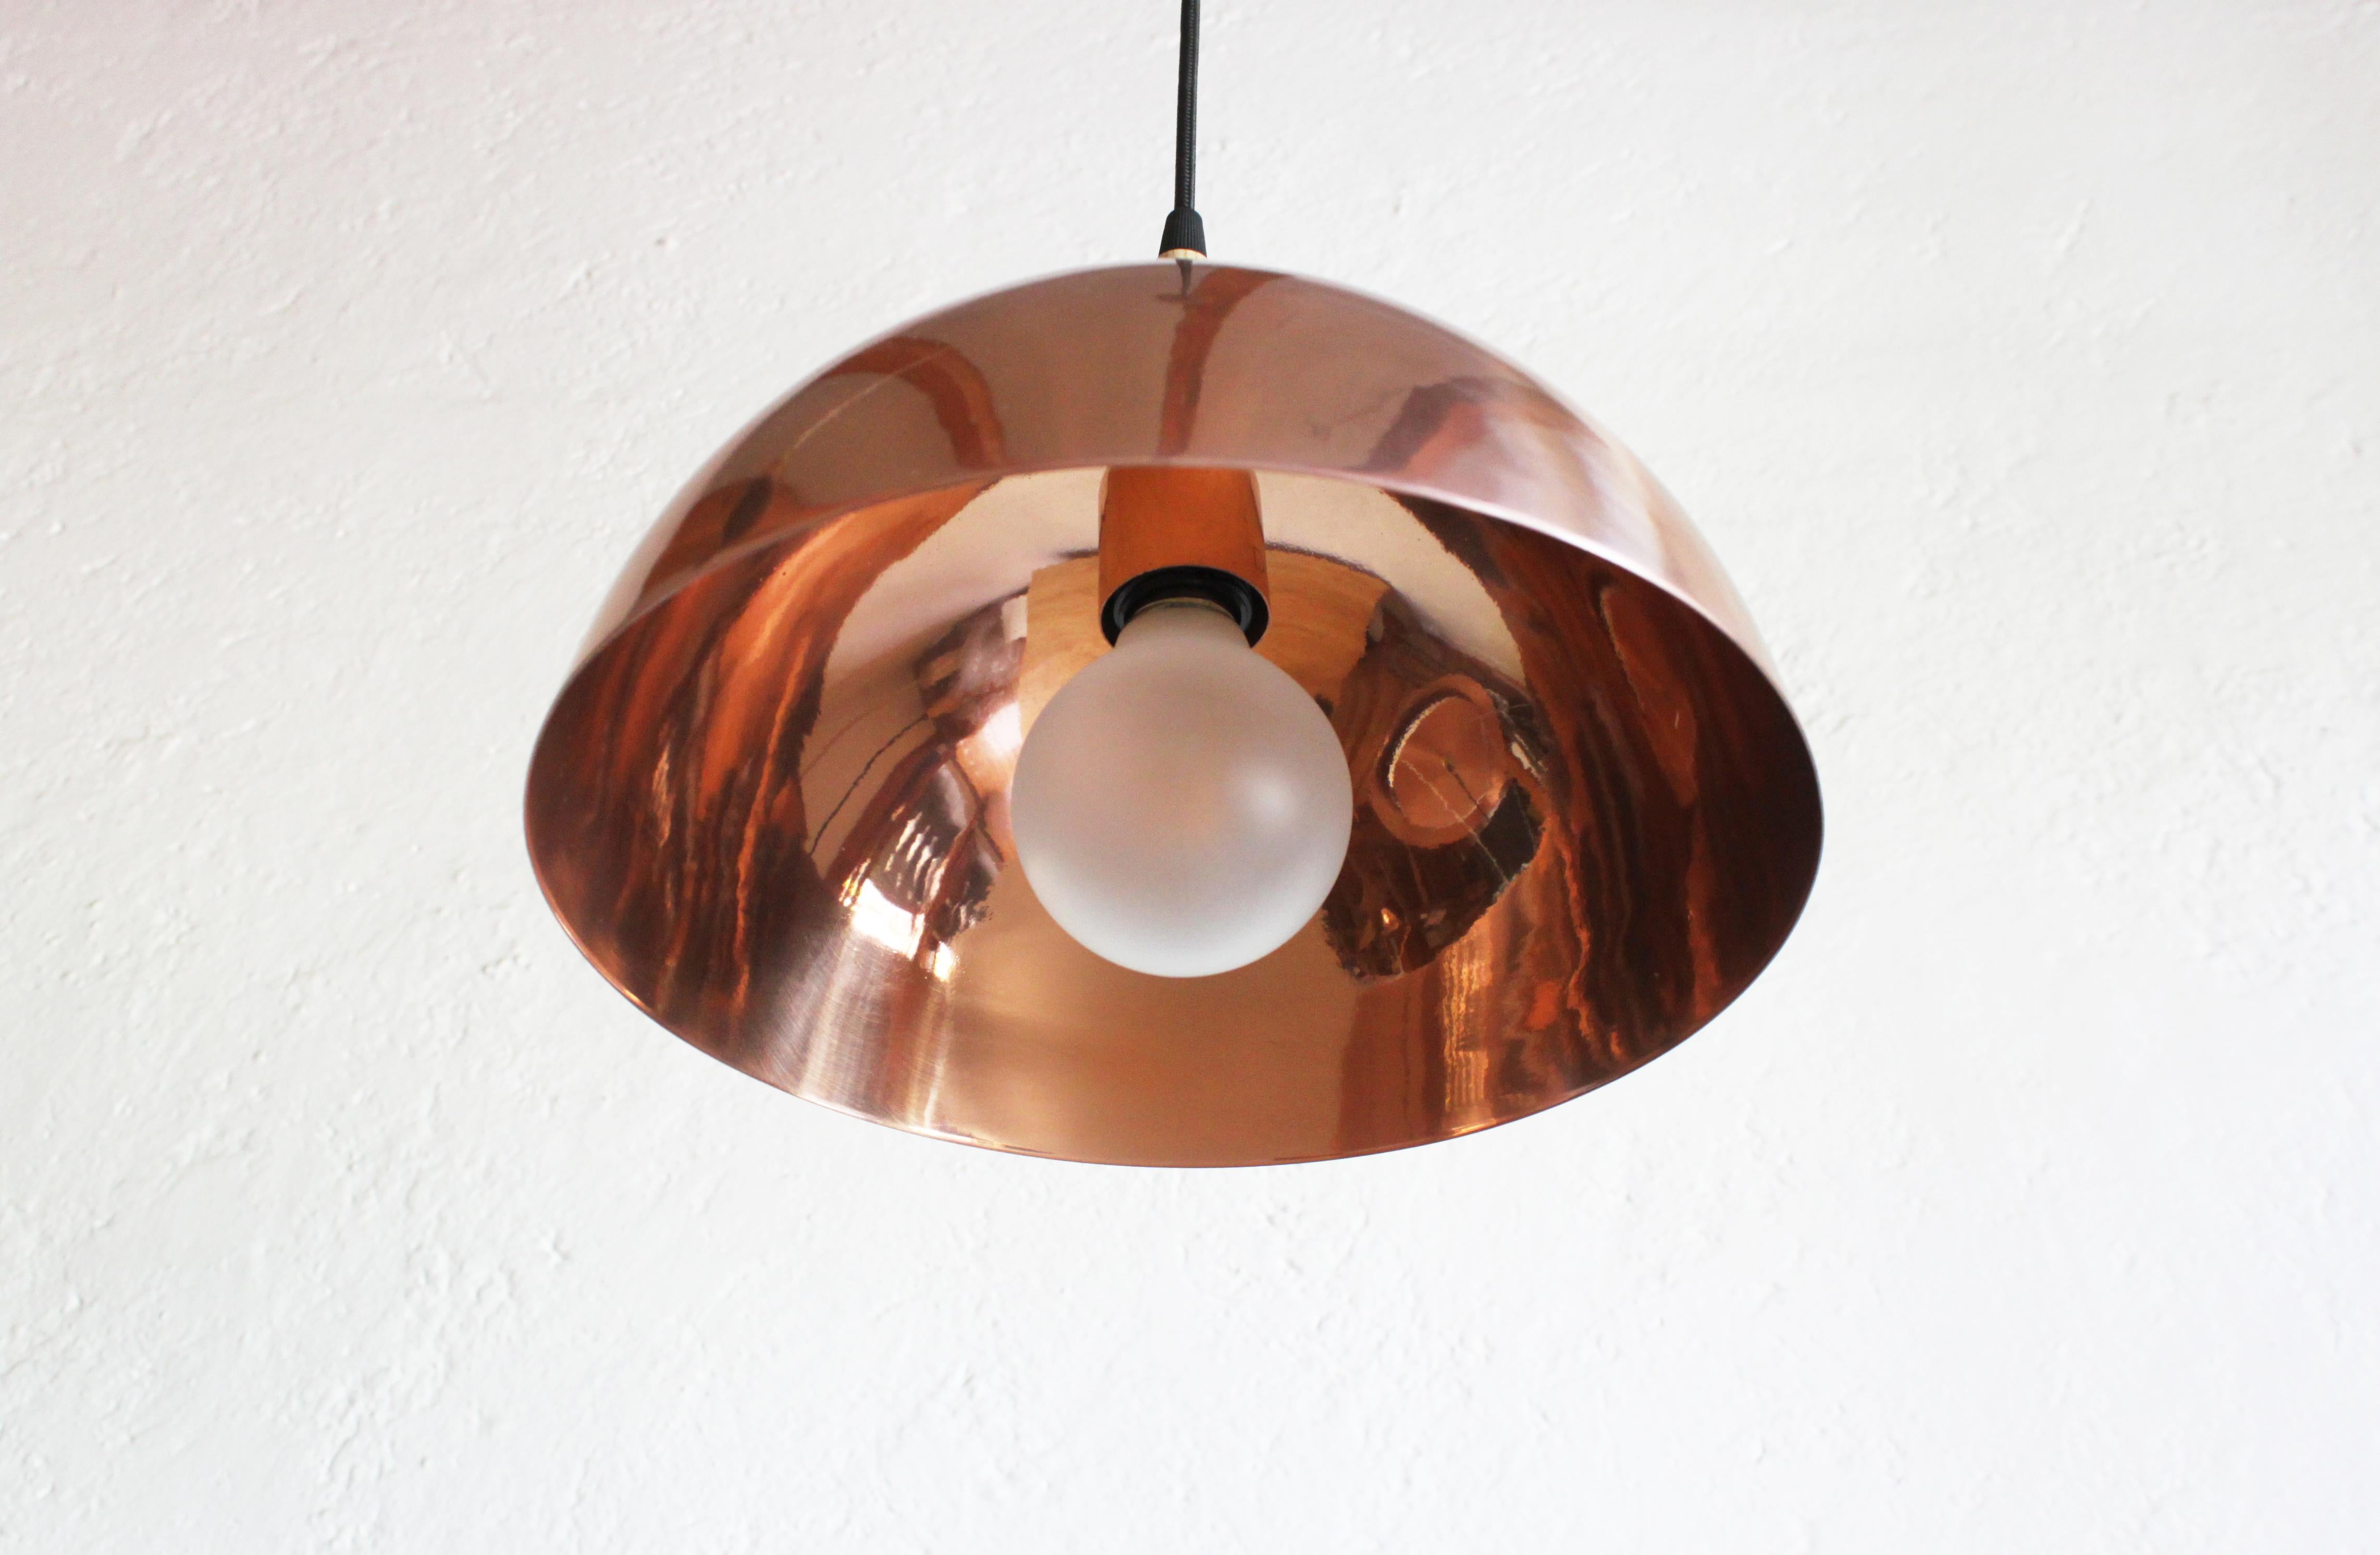 Copper Domo Abajo 30 Pendant Lamp, Maria Beckmann, Represented by Tuleste Factory For Sale